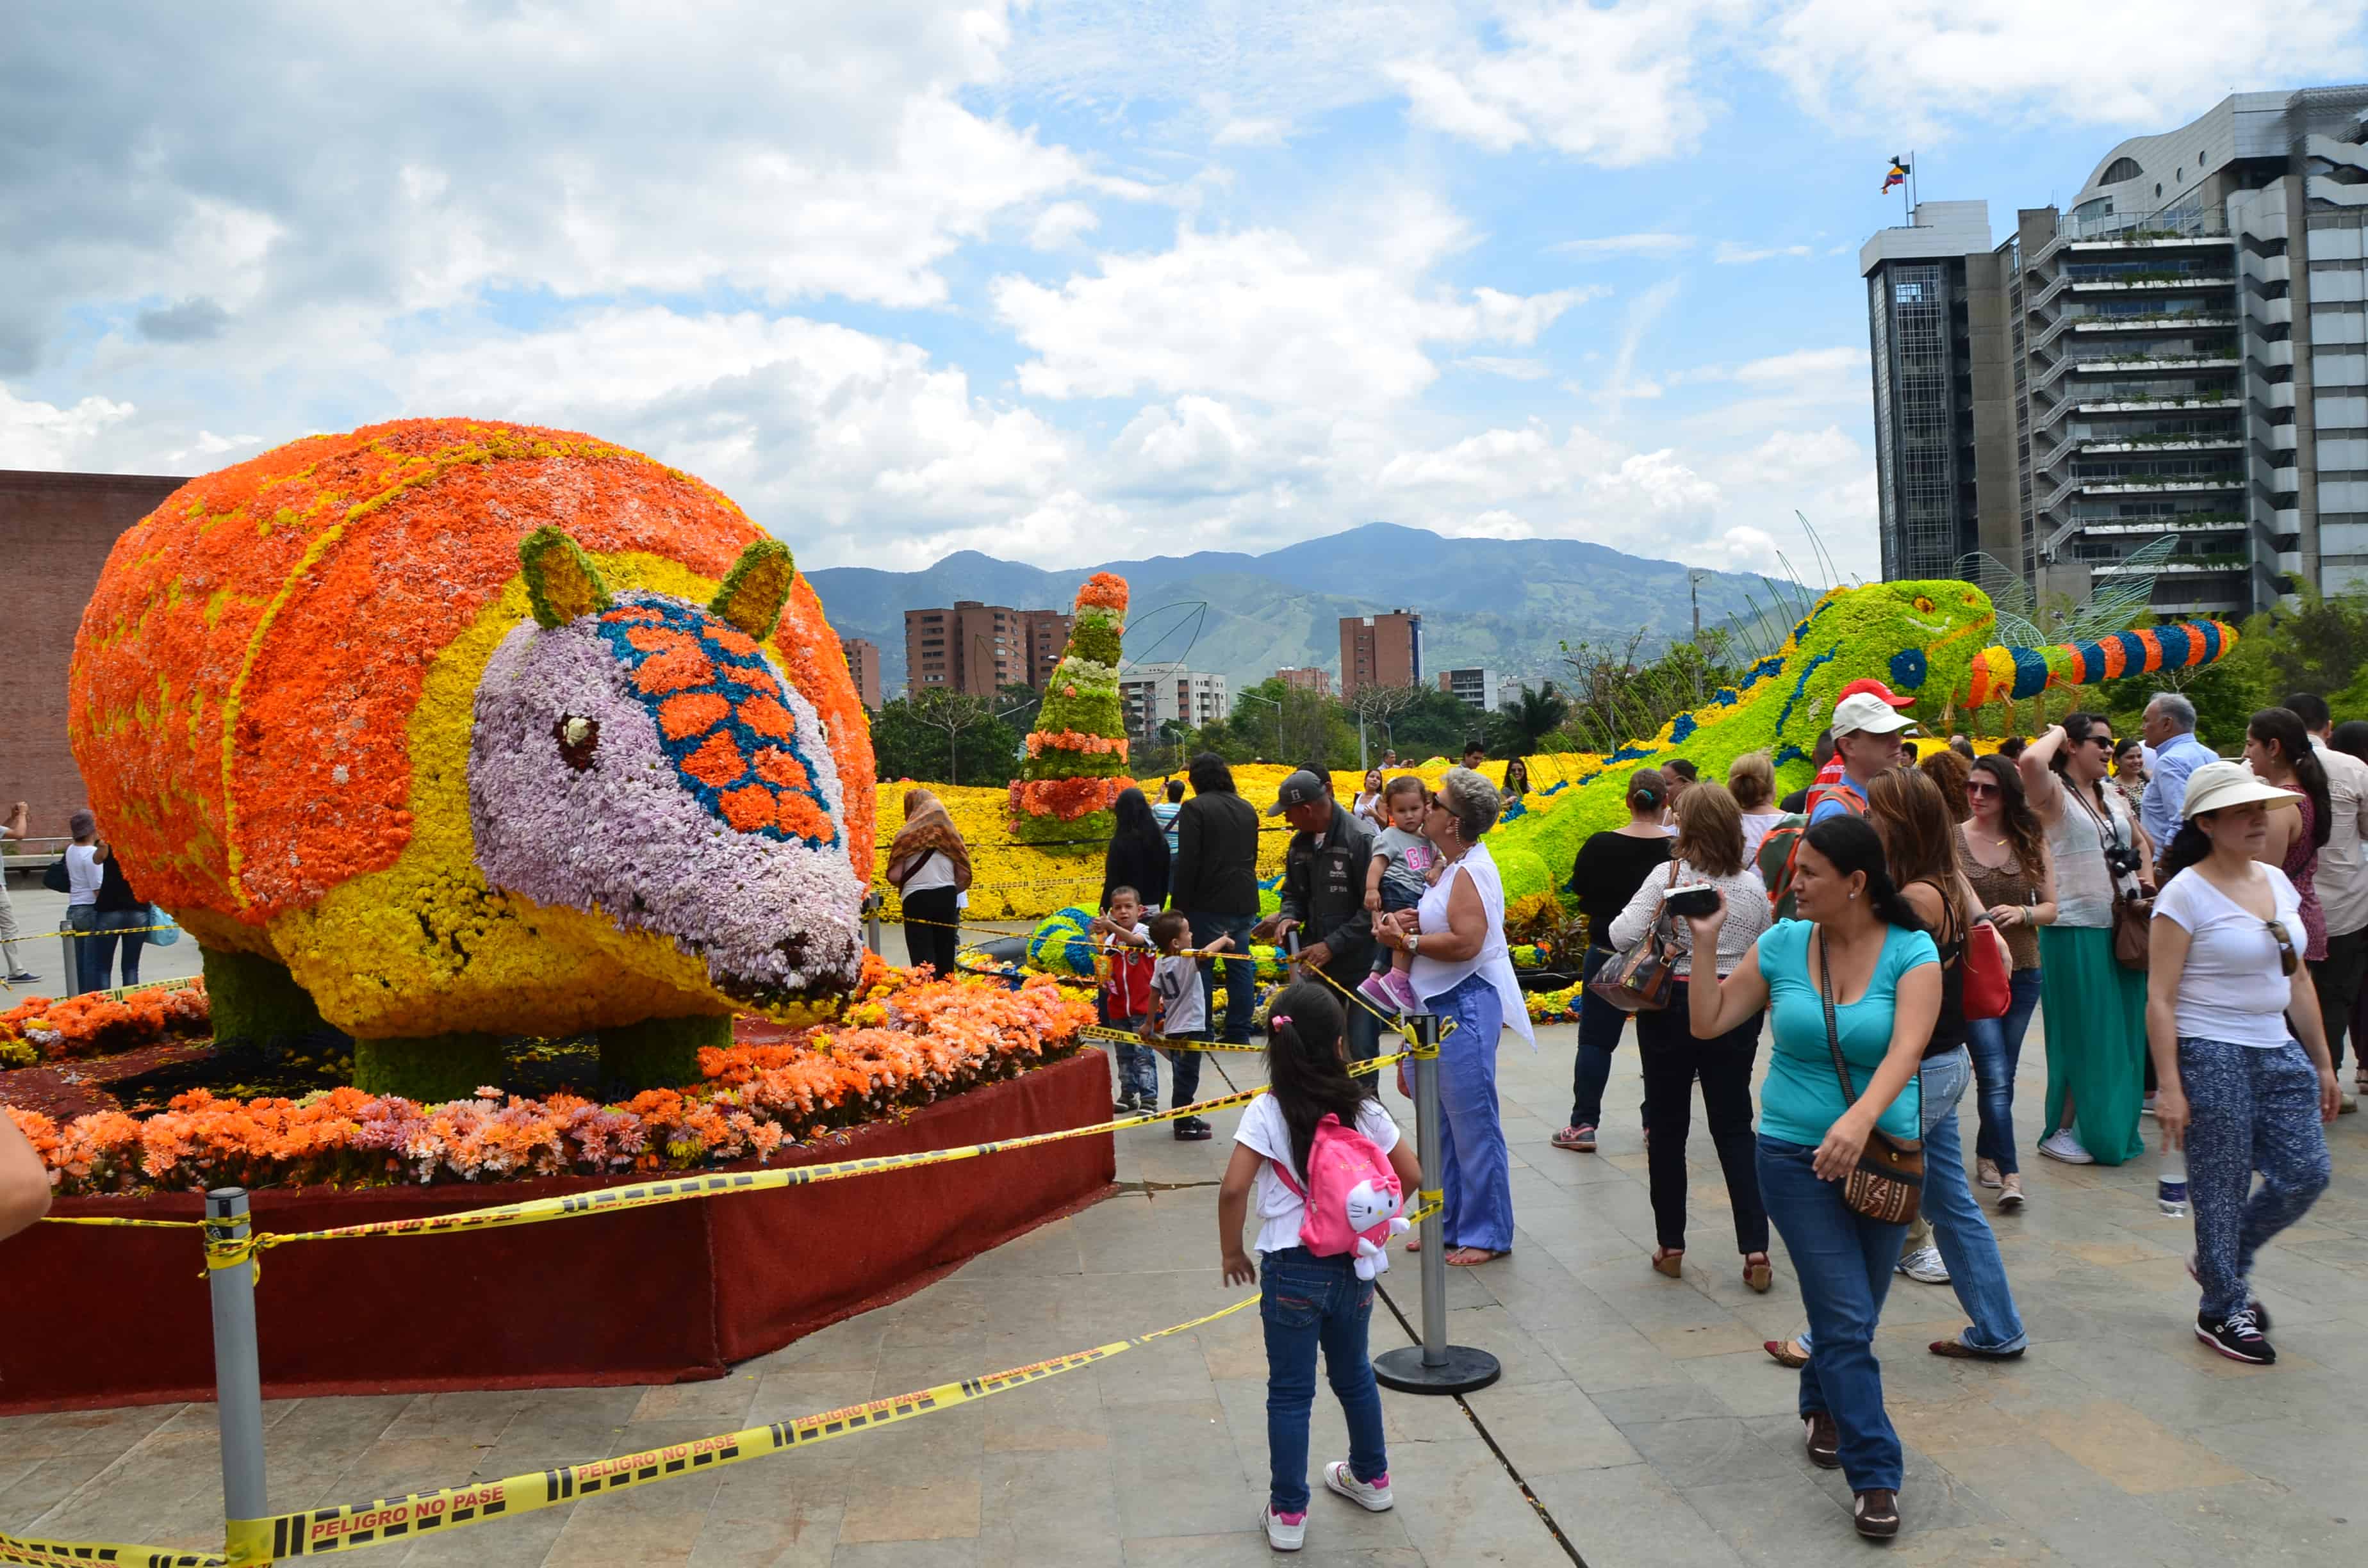 Event at Plaza Mayor in the Flower Festival, Medellín, Antioquia, Colombia